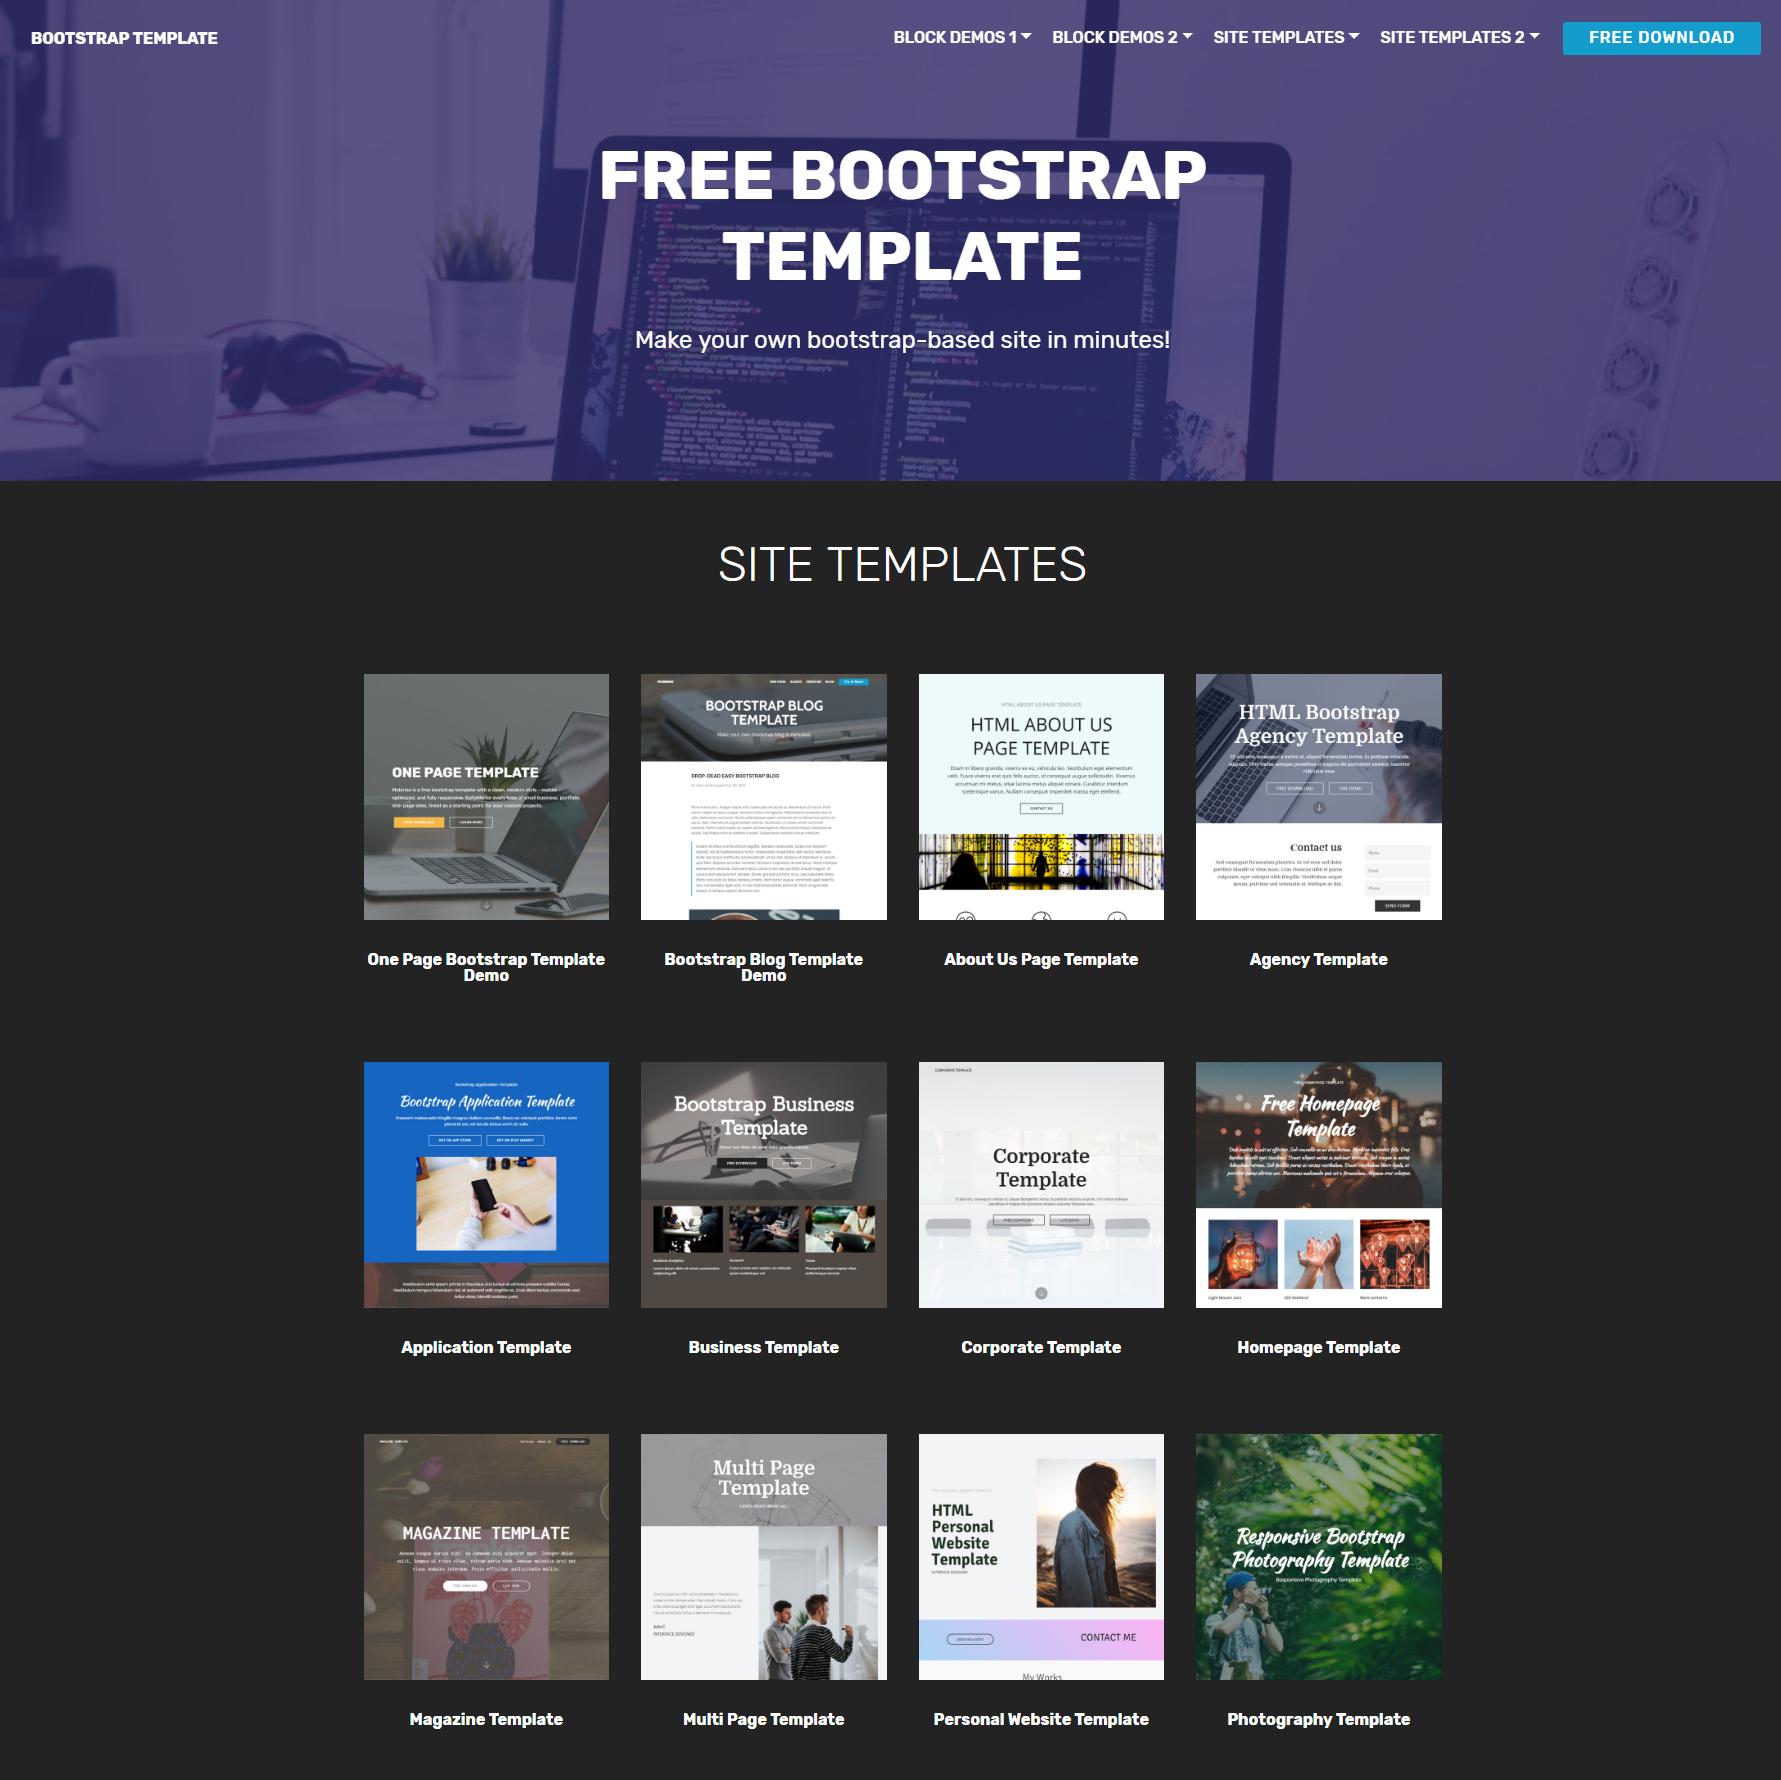 bootstrap-4-form-template-free-download-free-printable-templates